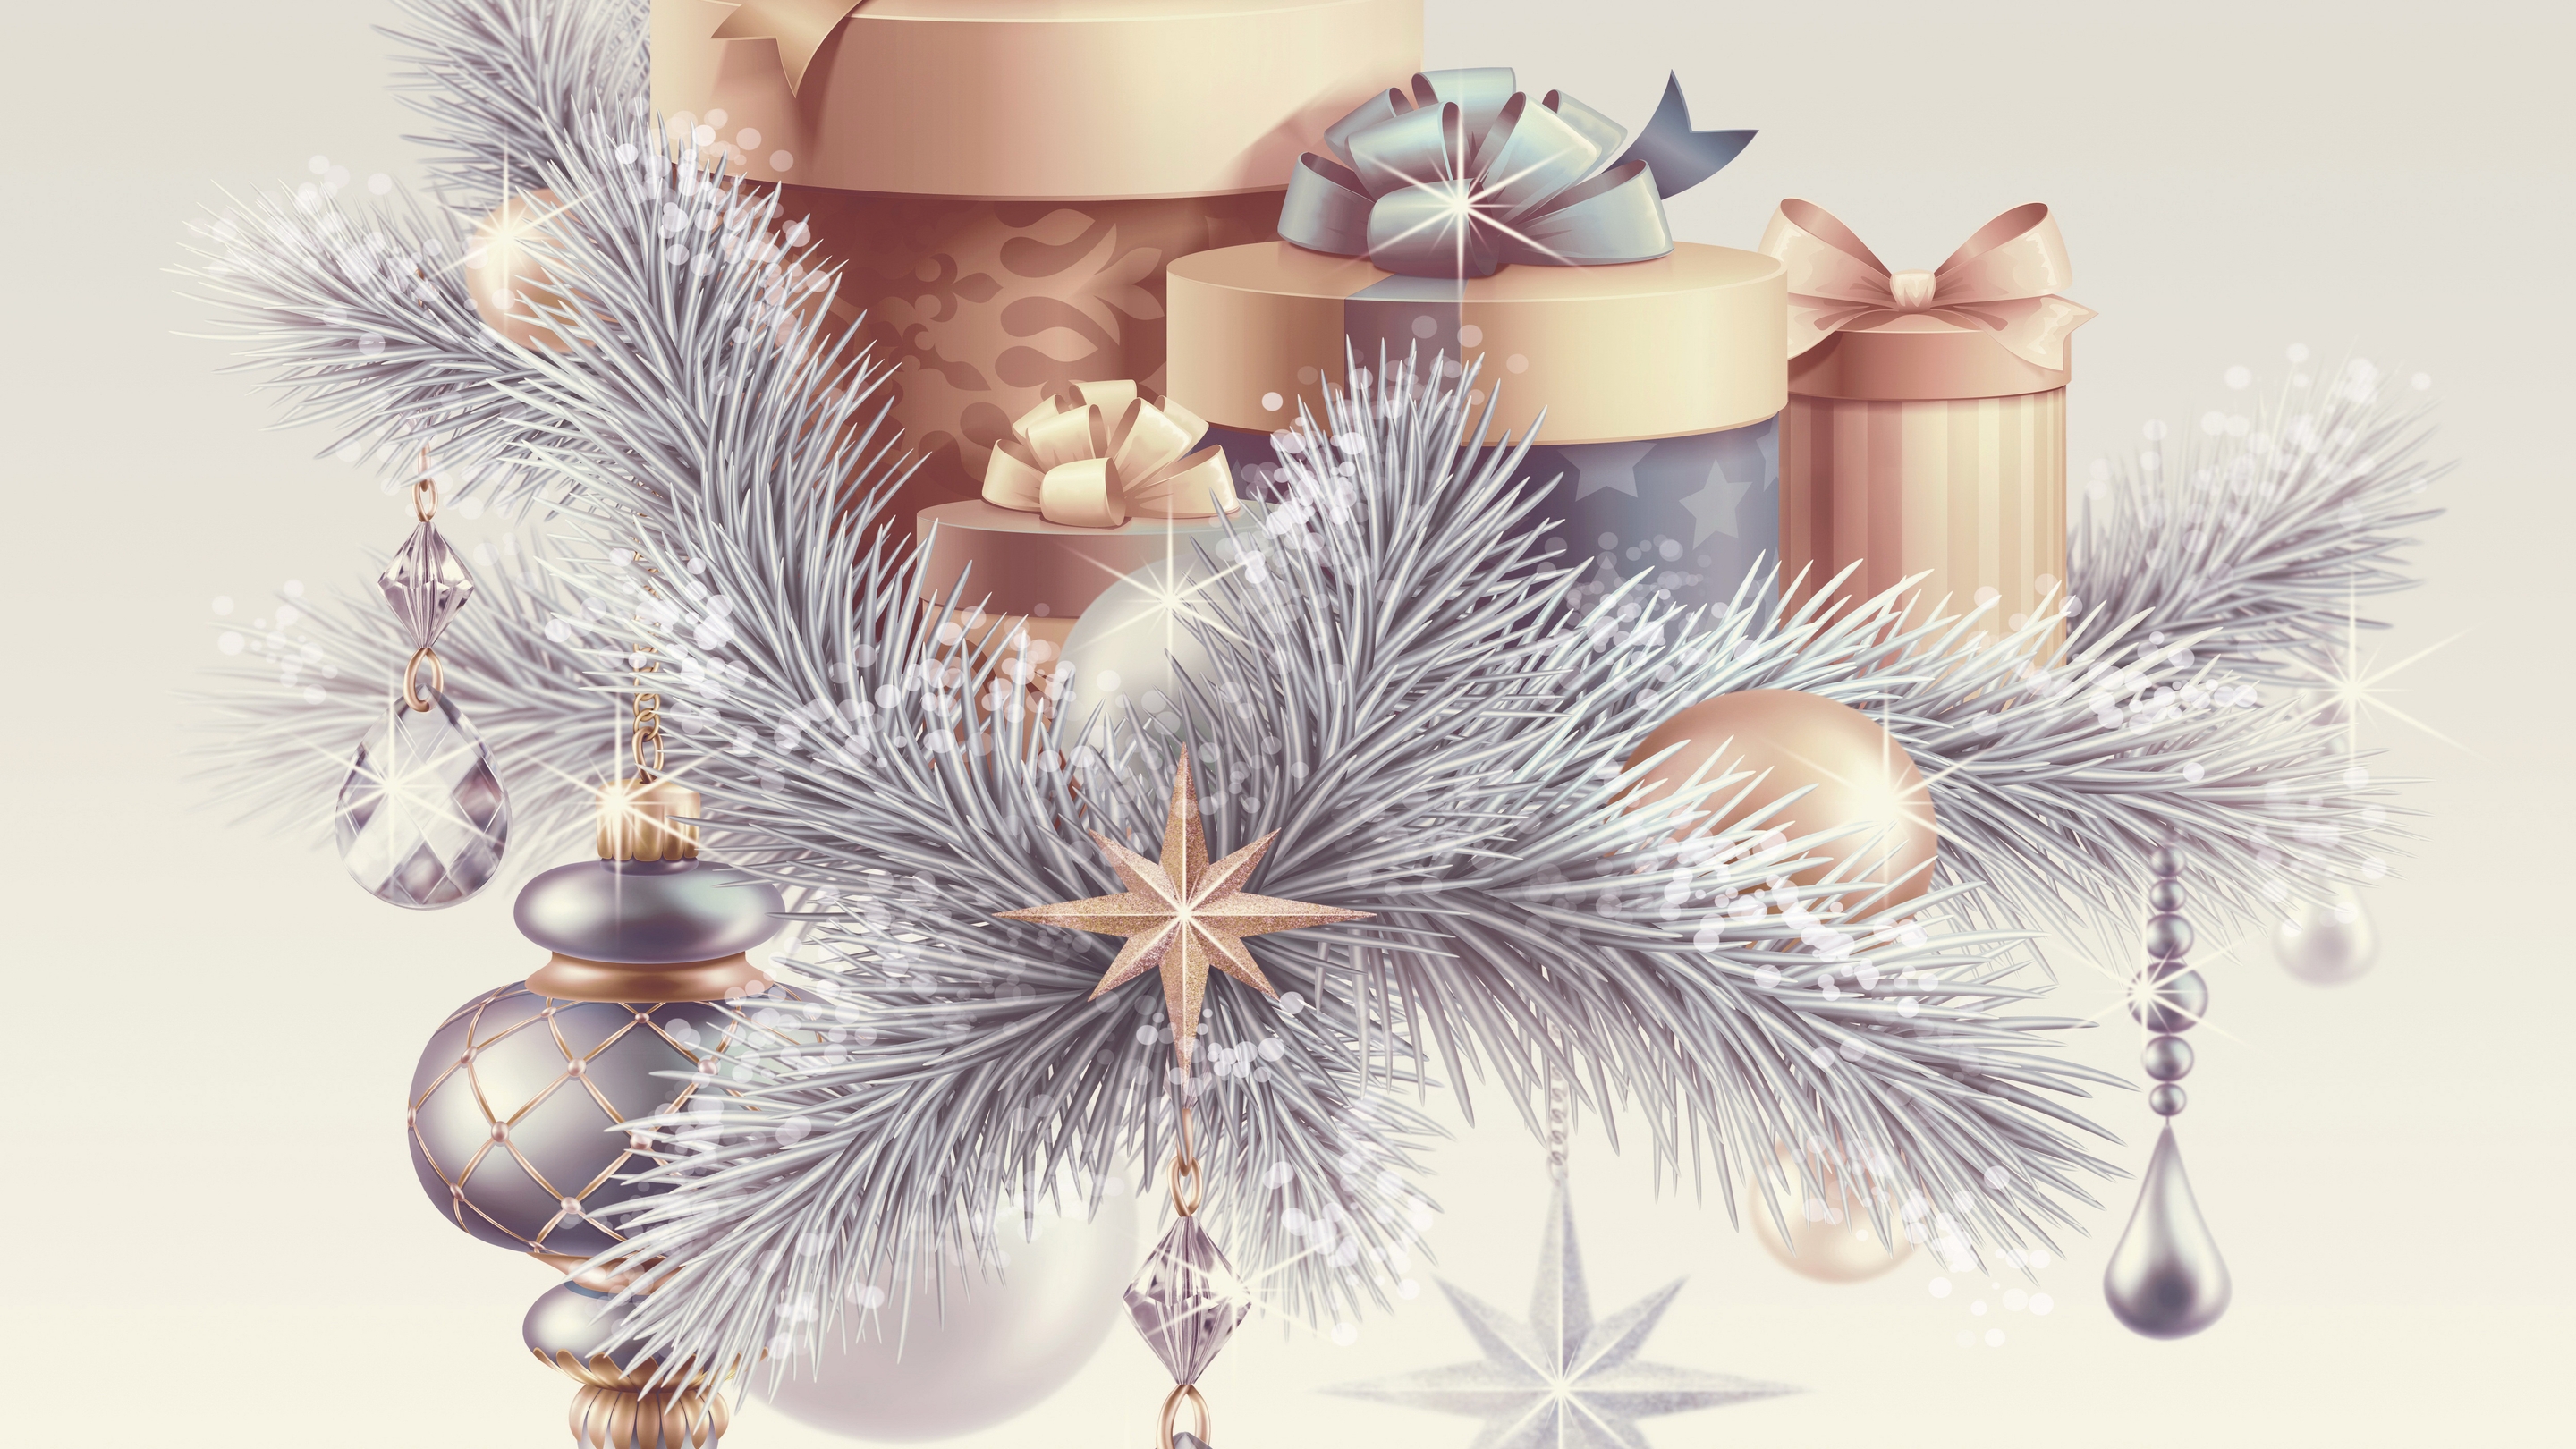 Image: Gifts, fir tree, branches, New year, stars, decorations